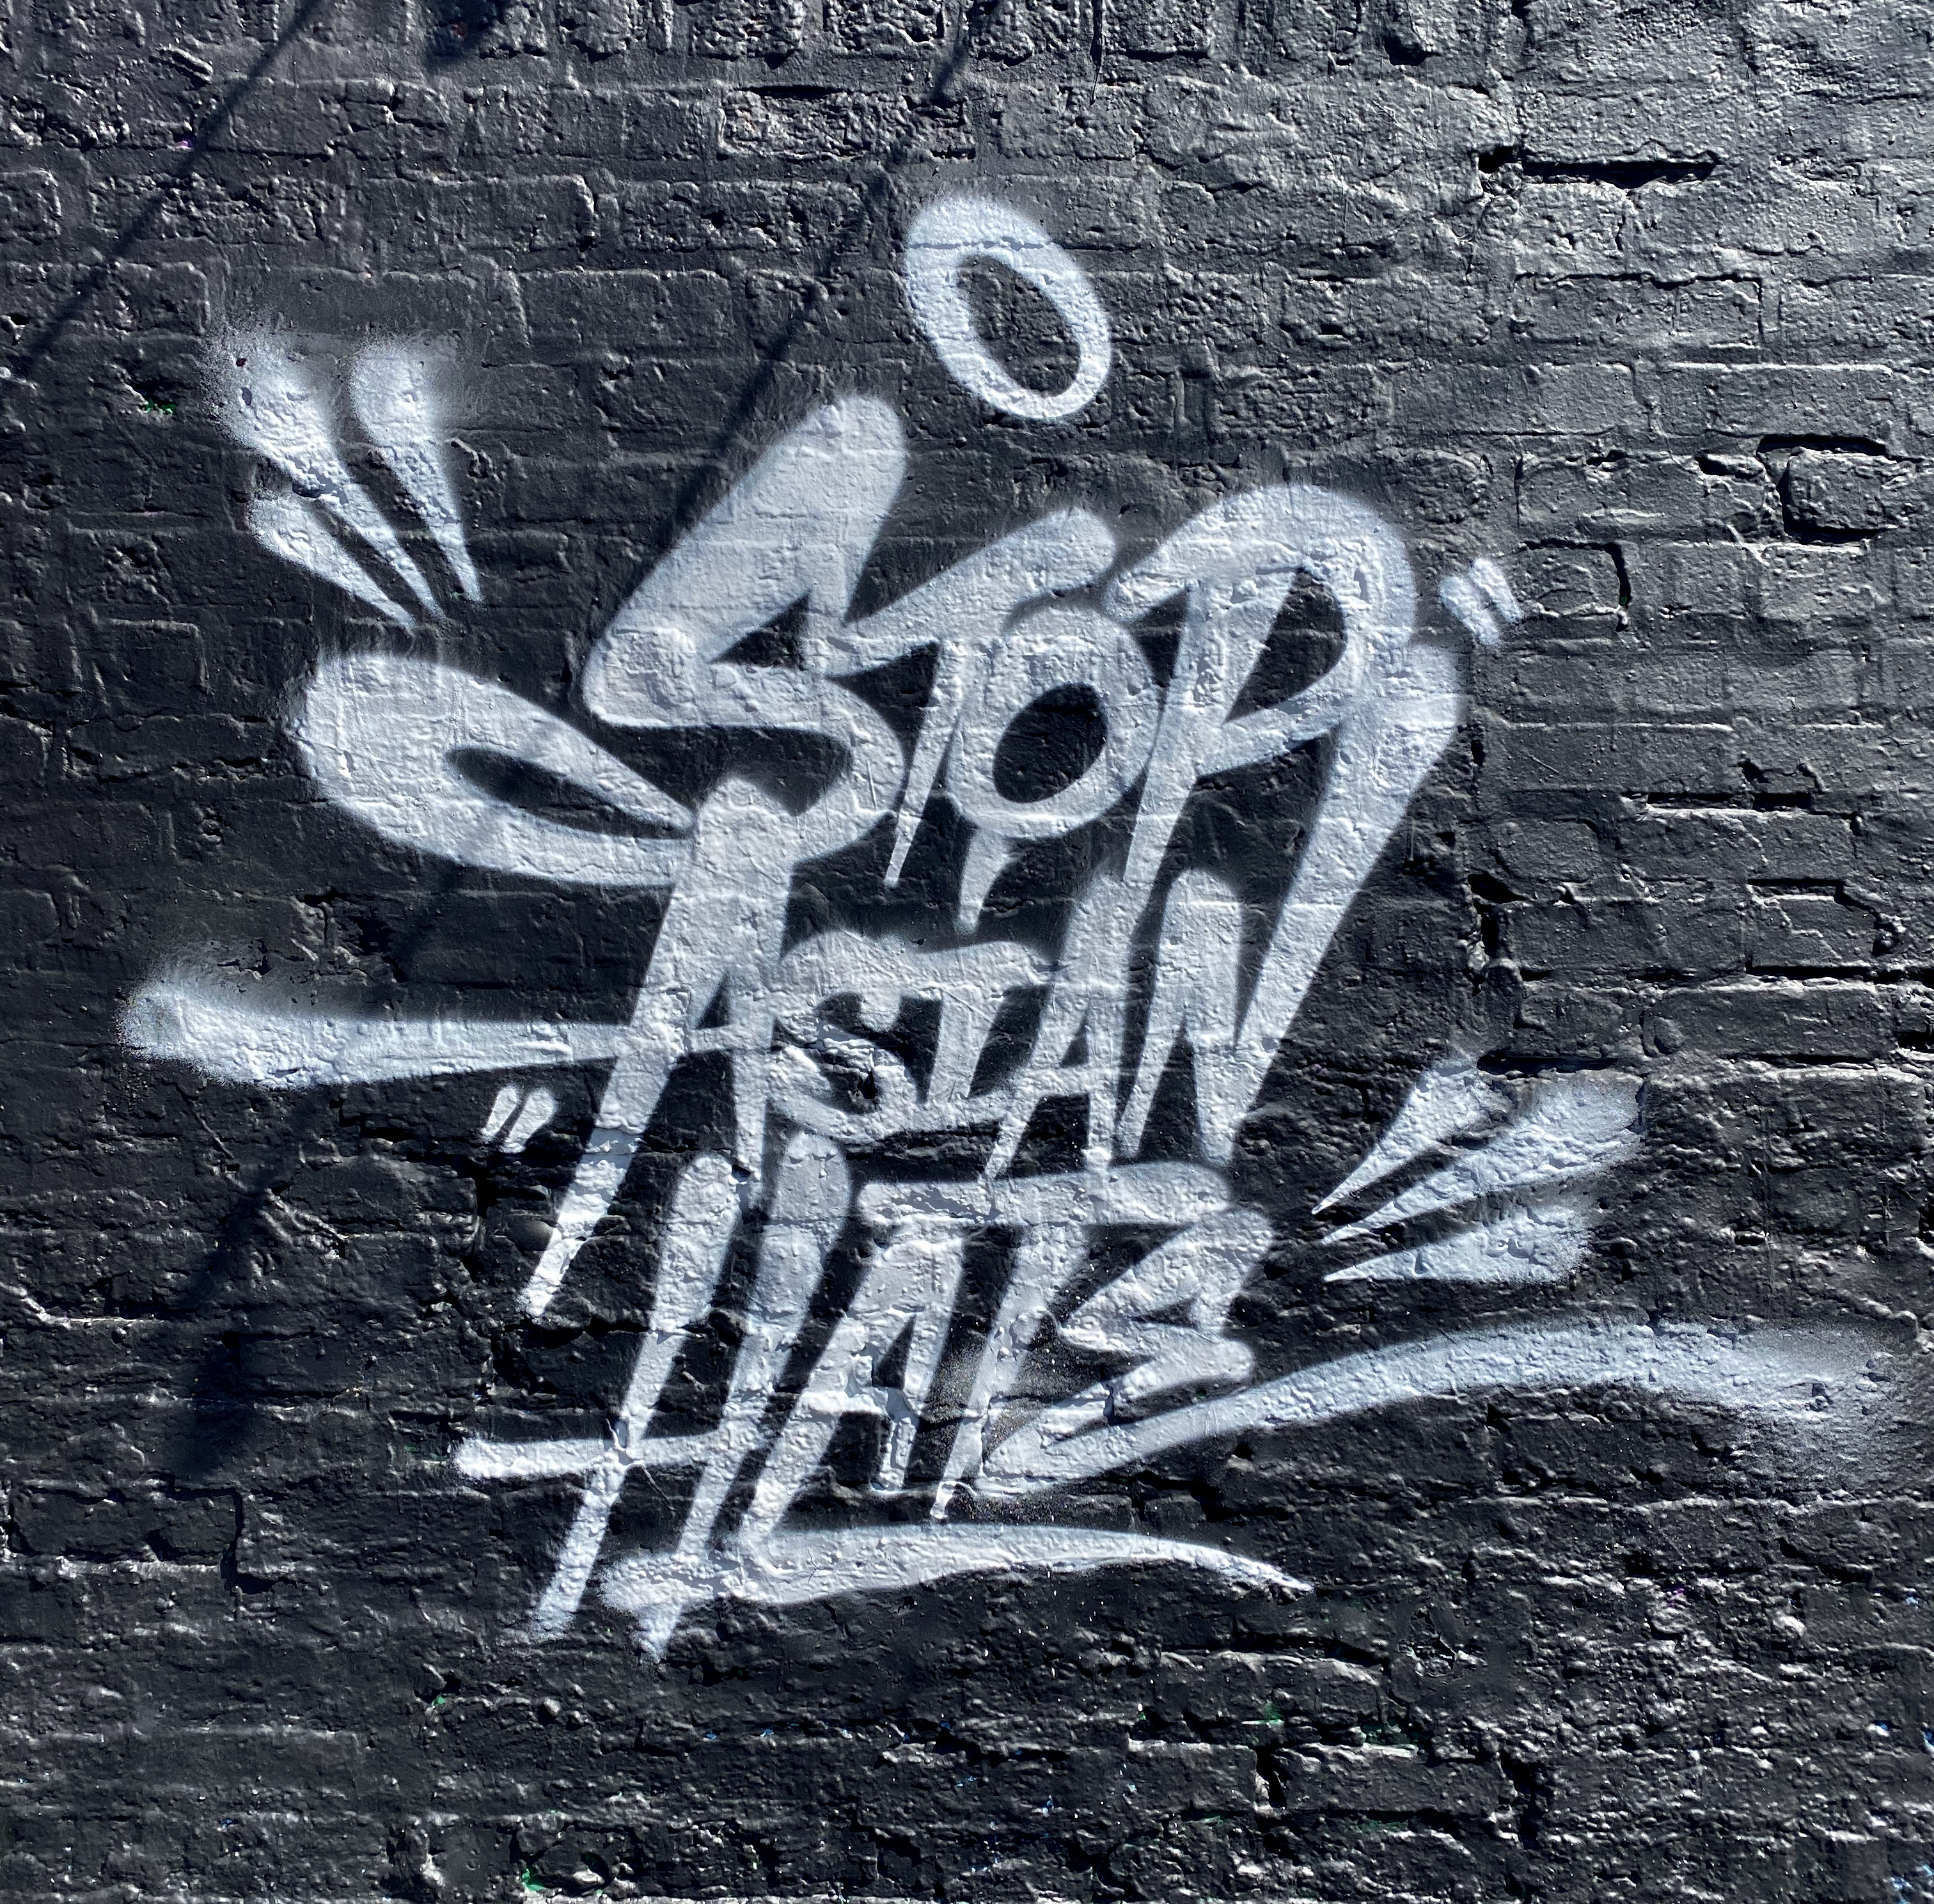 A graffiti tag reading “stop Asian hate” using white paint on a black brick wall.